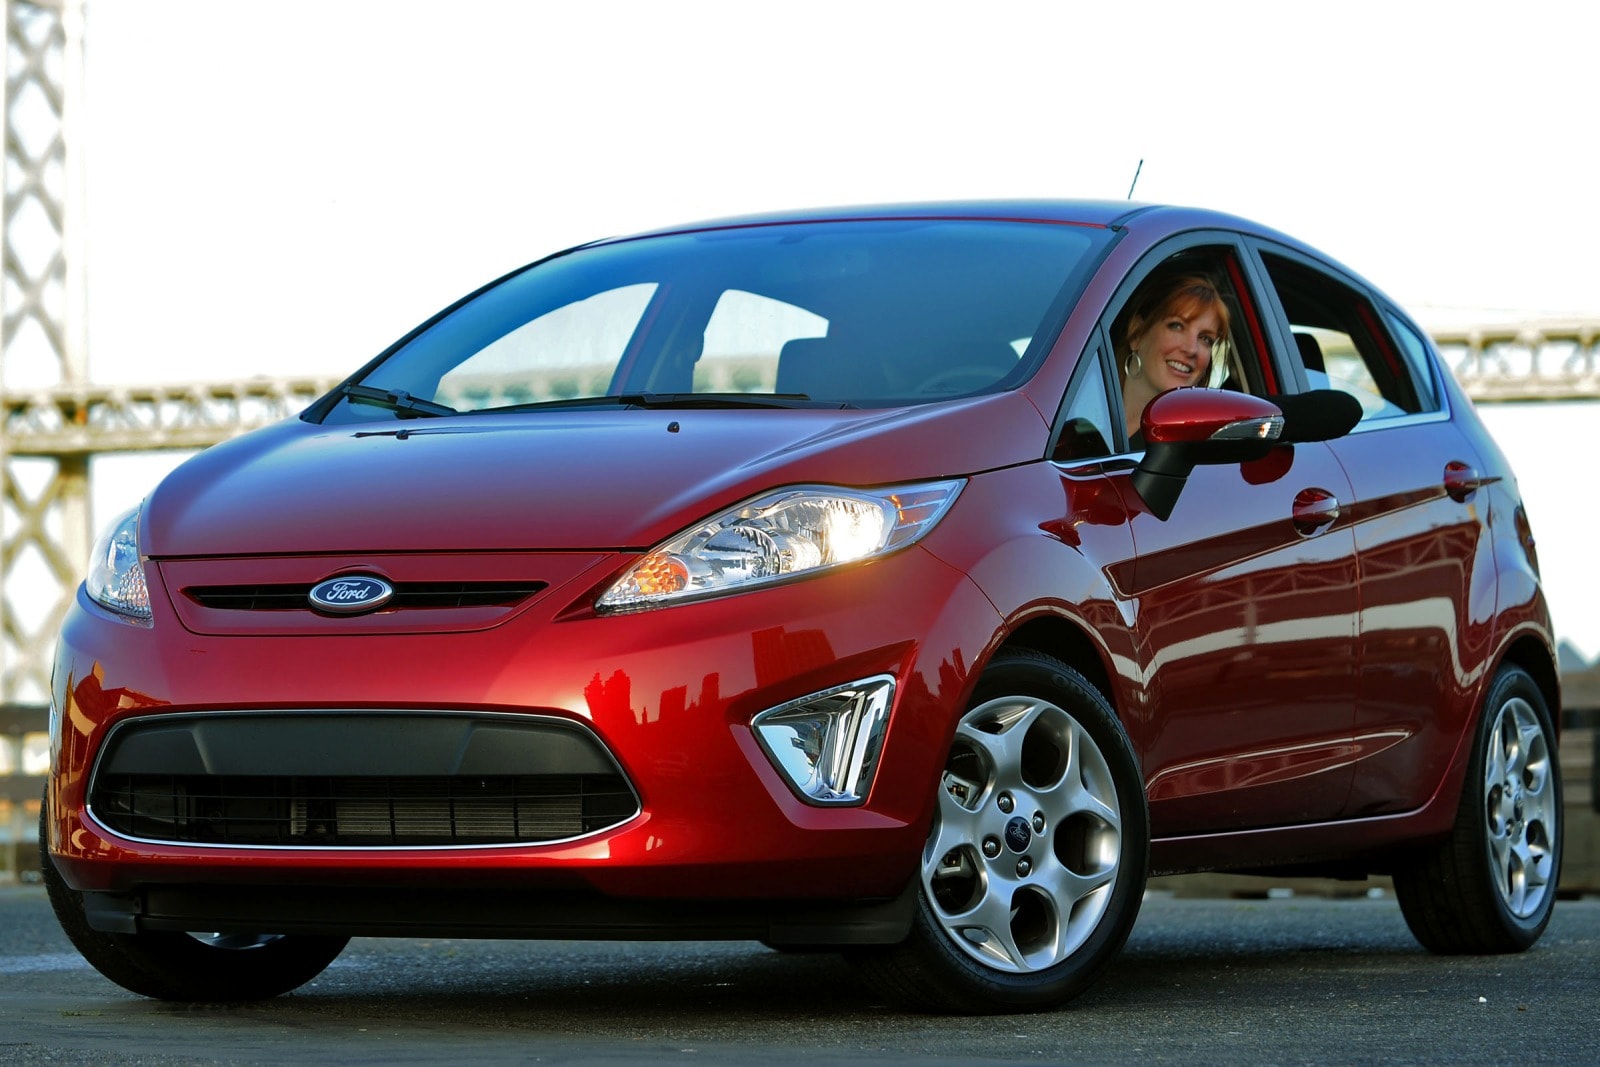 2013 Ford Fiesta Review & Ratings | Edmunds